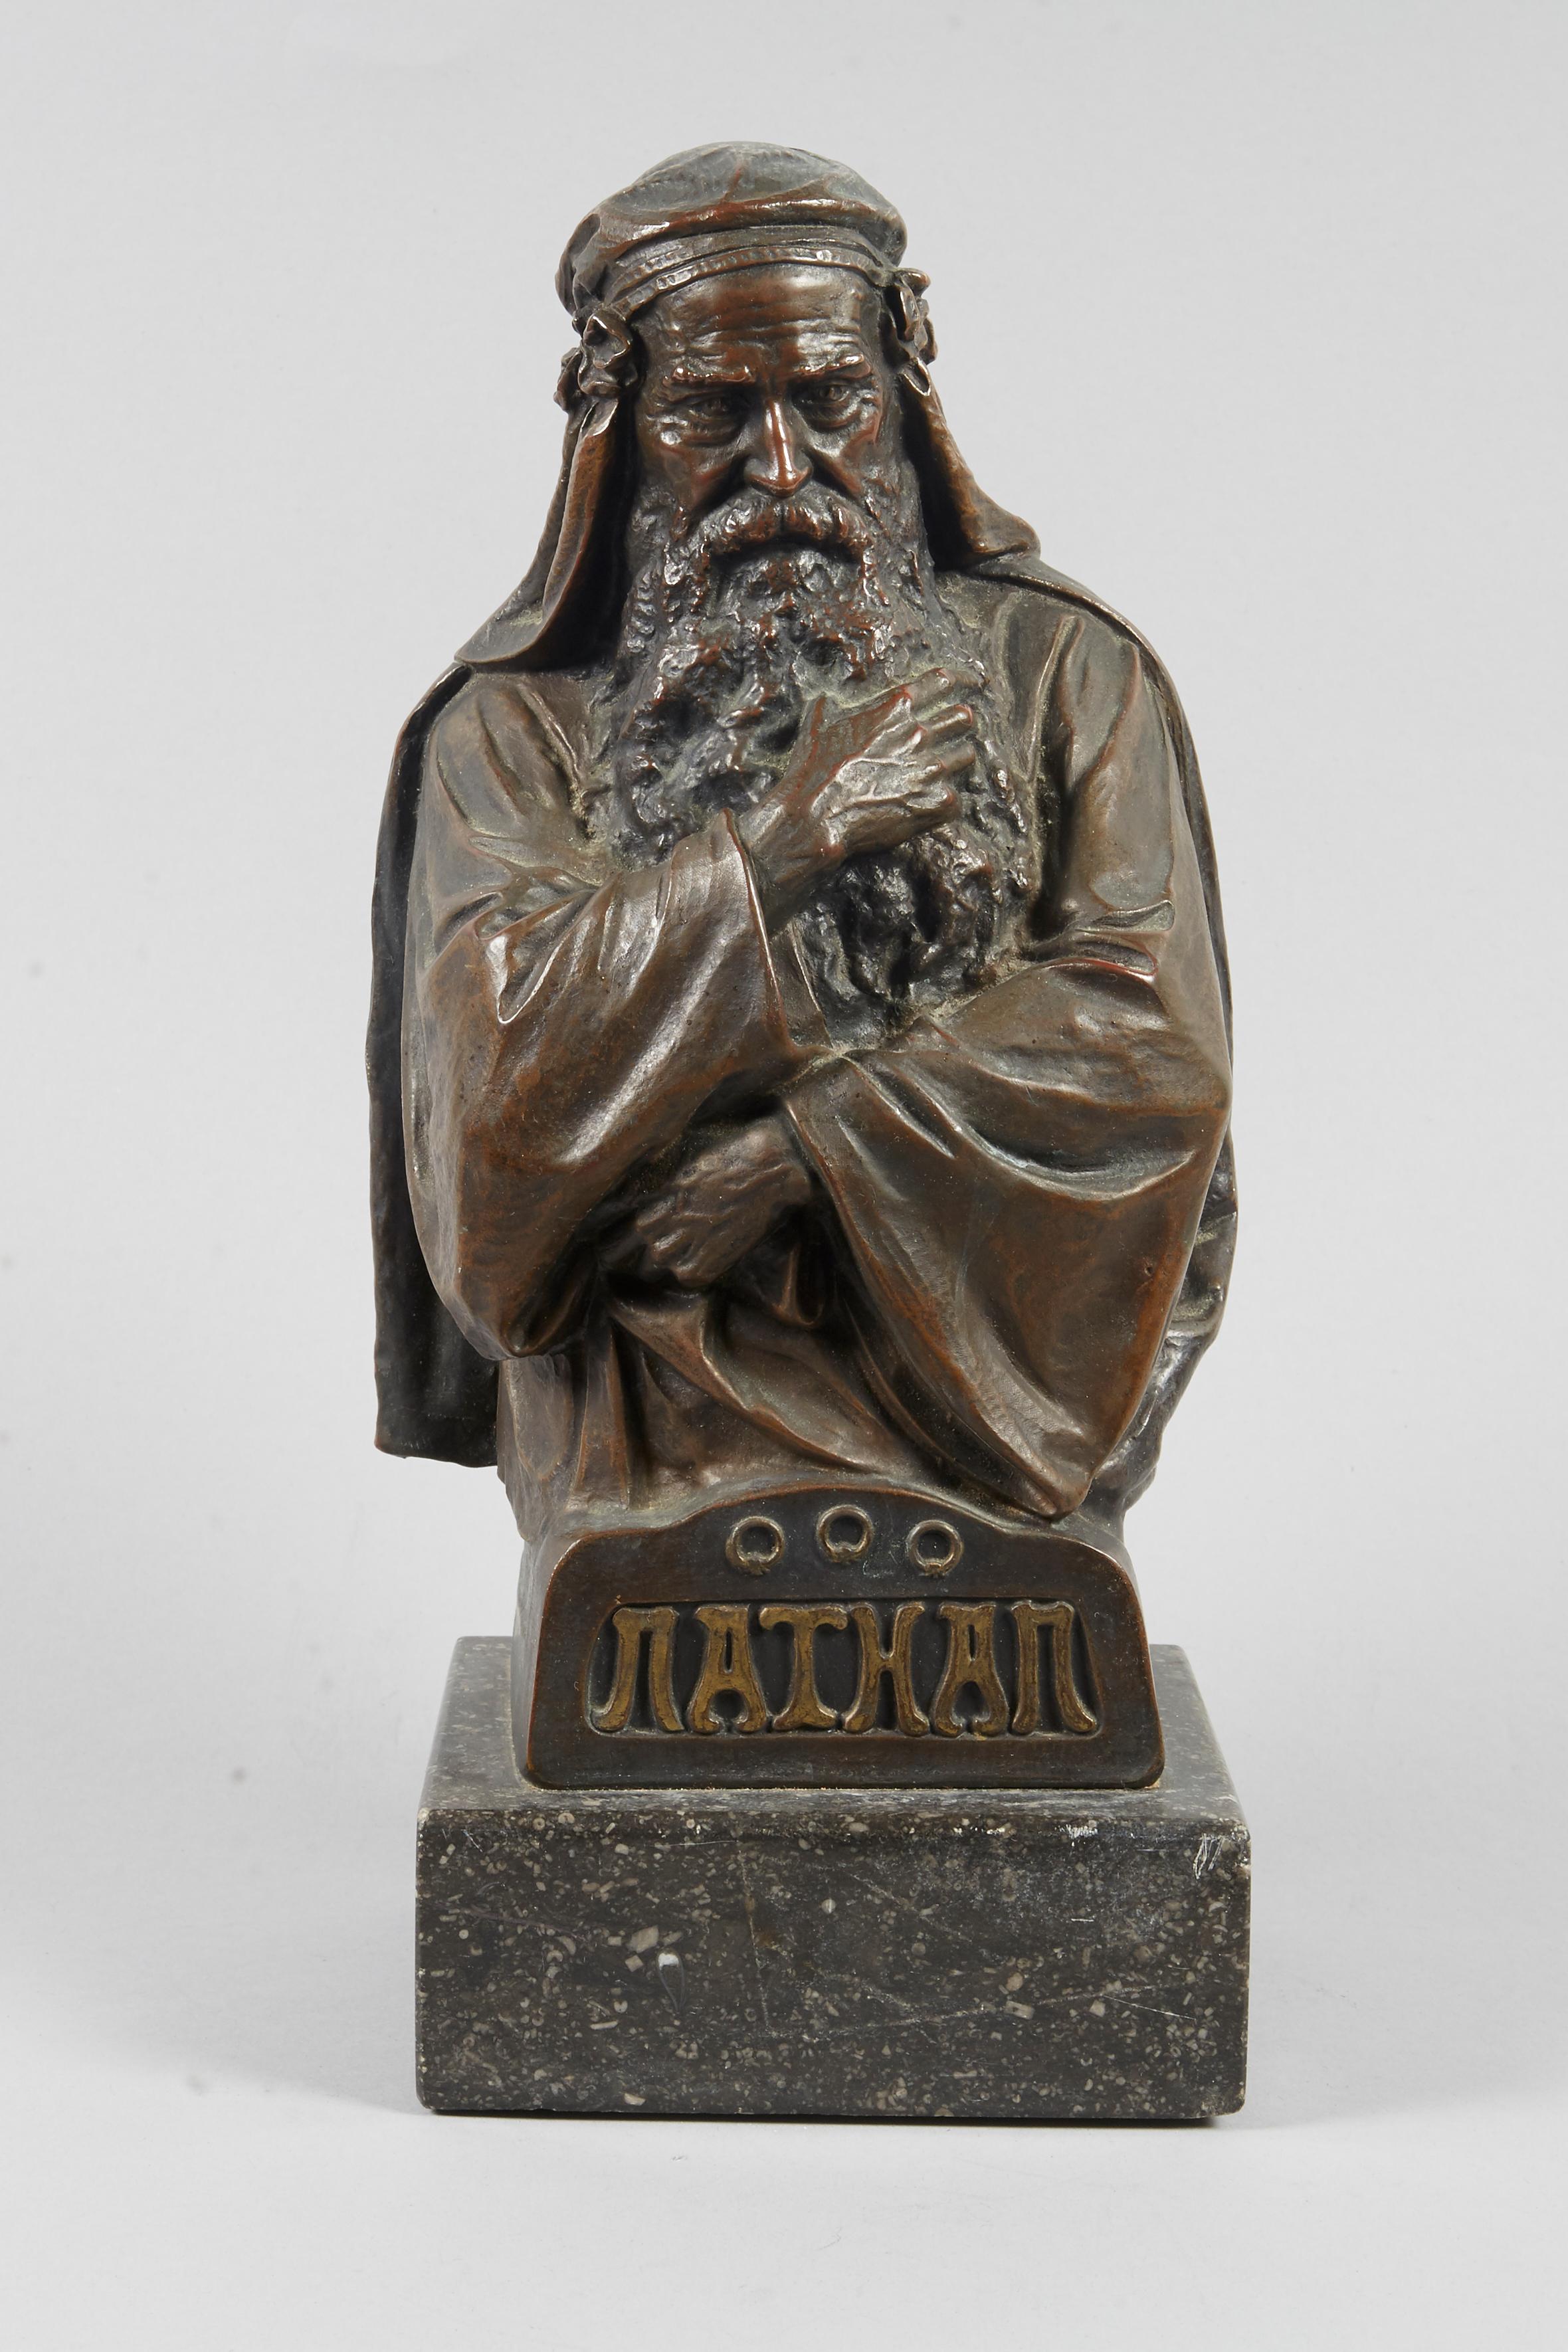 Judaic patinated bronze bust depicting Nathan the Wise, Austria, 19th century. 
Inscribed Dimanche on the back. Original marble base.
Similar example depicting Nathan the Wise in his classic pose executed by famous Russian sculptor Mark Antokolski.